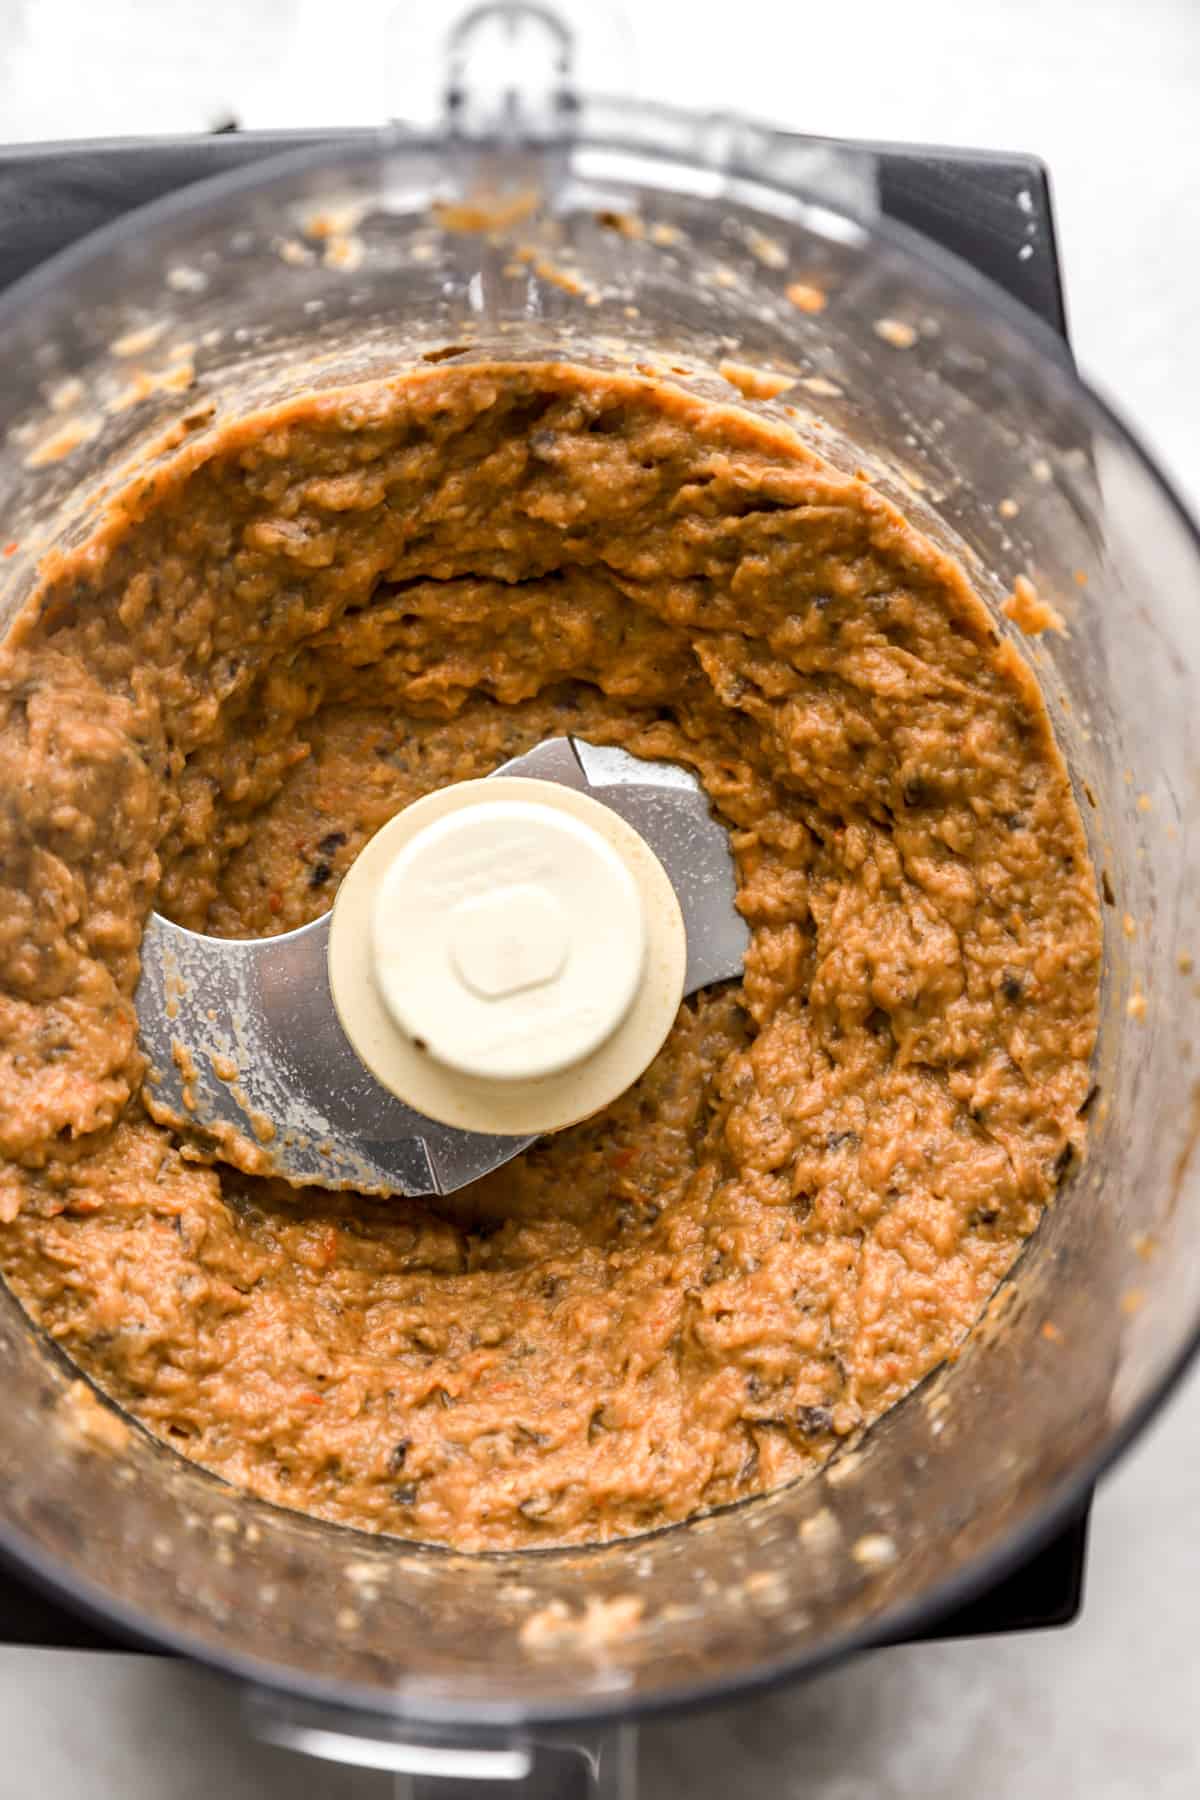 Submerge the eggplant mixture in a food processor.